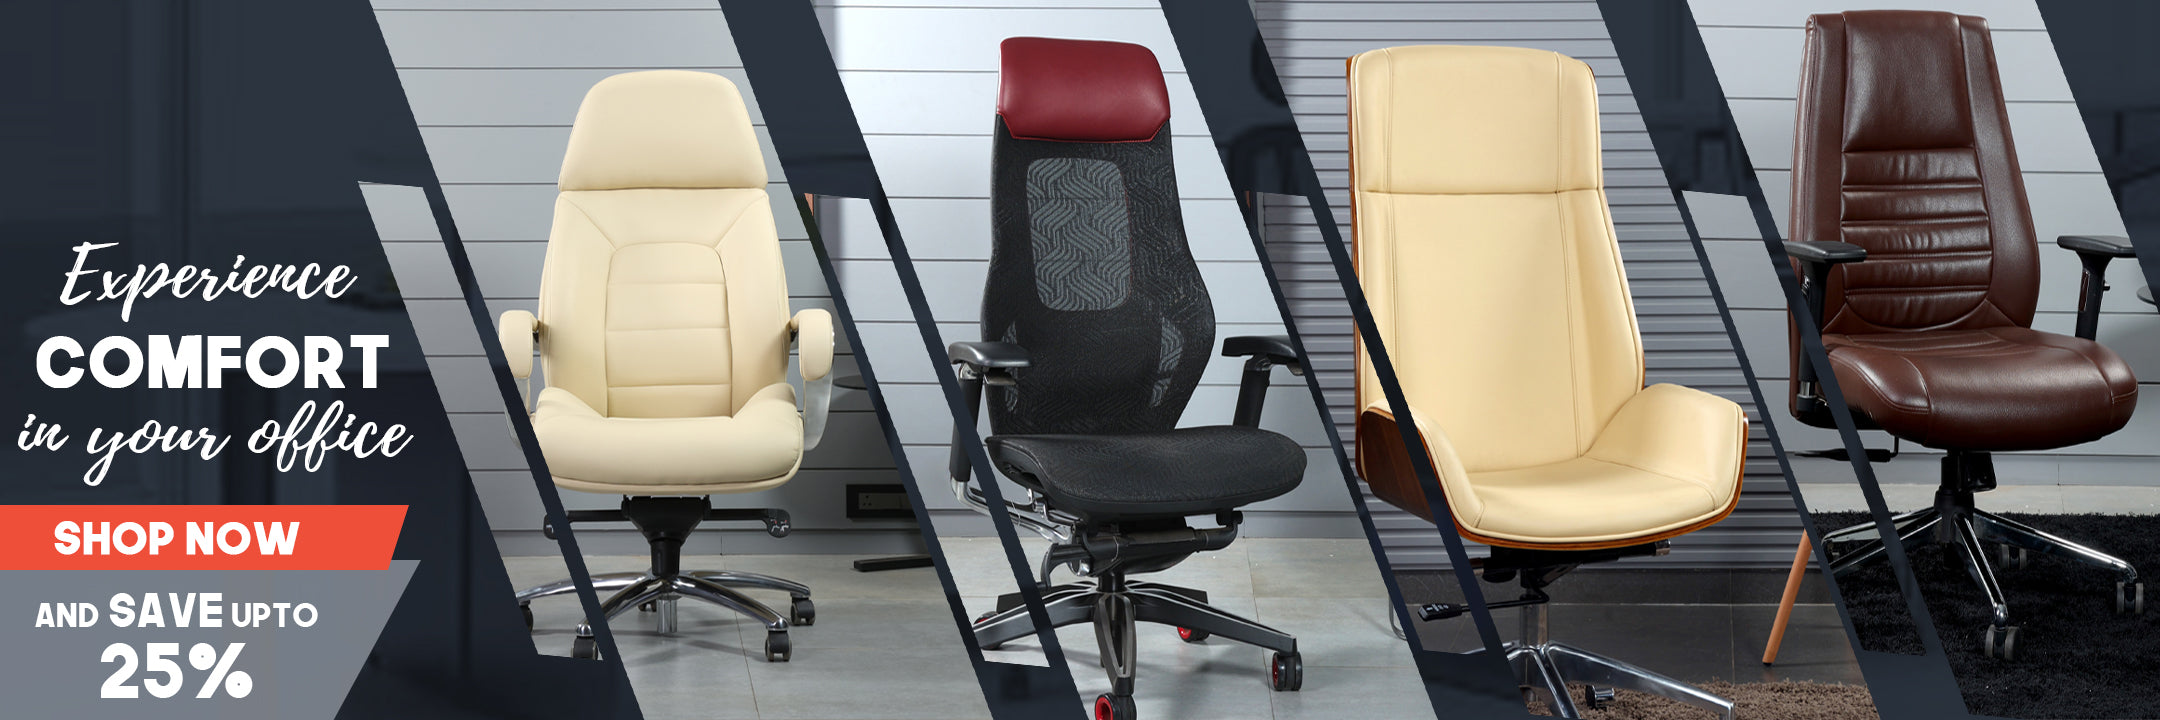 Office Chair Collection